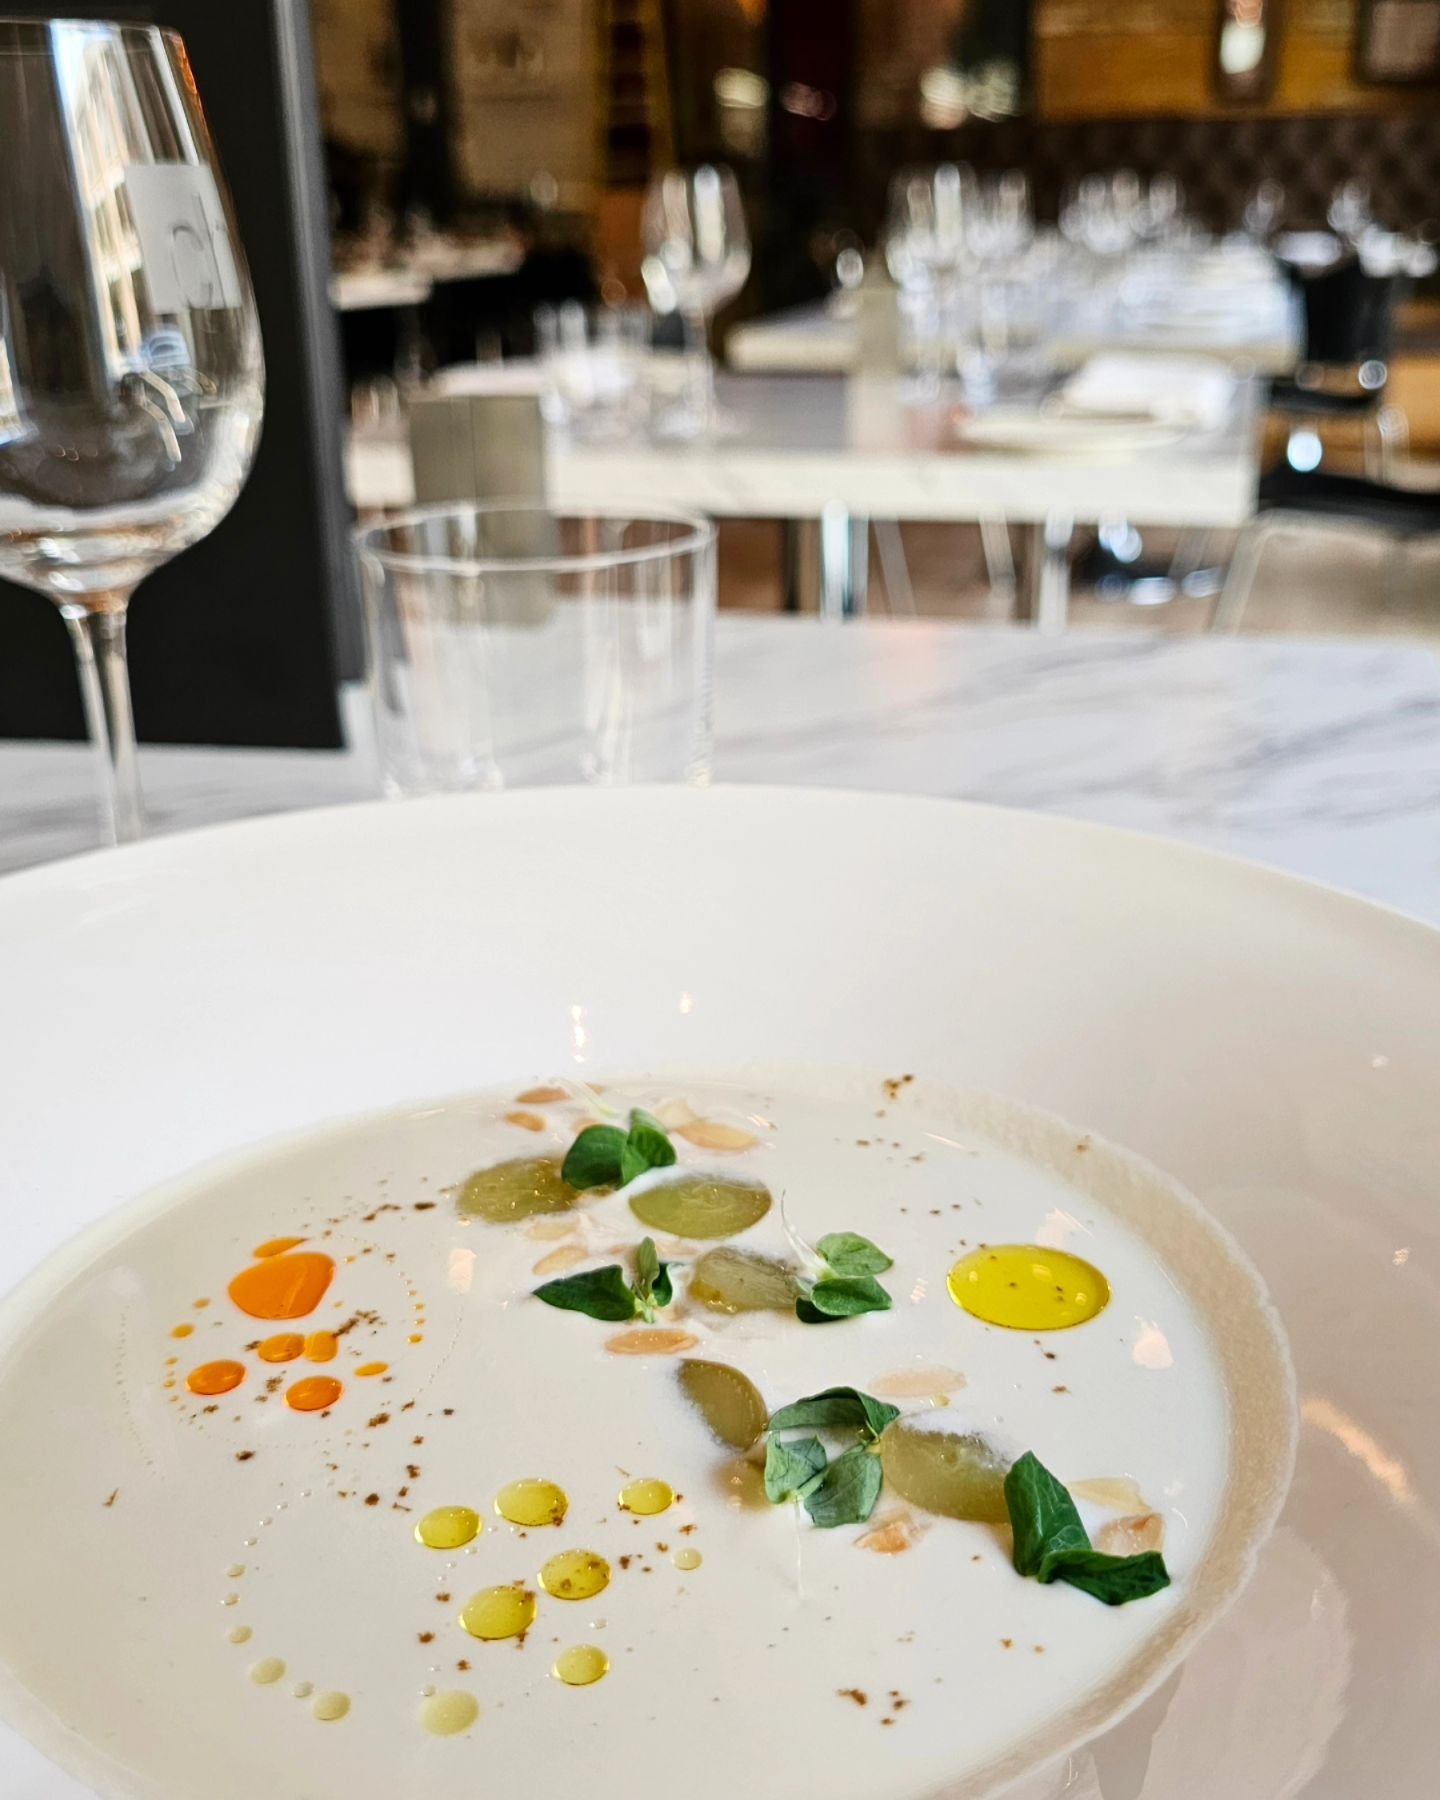 Ajo Blanco
~White Gazpacho, Spiced Almonds, Chili Oil, Grapes

Located in the heart of Old Town Toronto, the Chefs' House is the perfect place to try a unique, fine dining experience 

Book your reservation today at opentable.ca 
.
.
.
.
.
.
.
.
.
.
